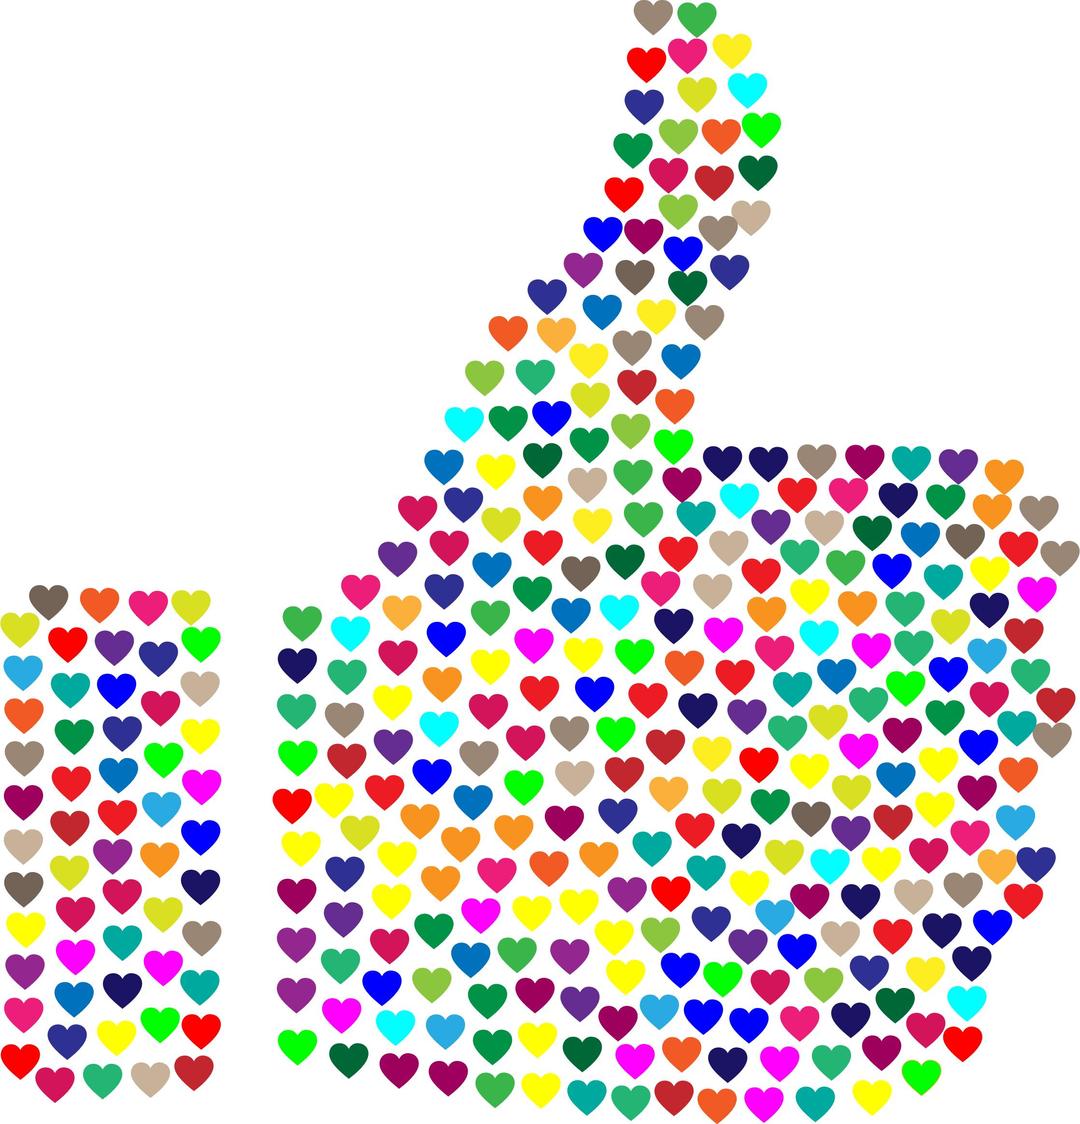 Prismatic Hearts Thumbs Up Silhouette No Background png transparent